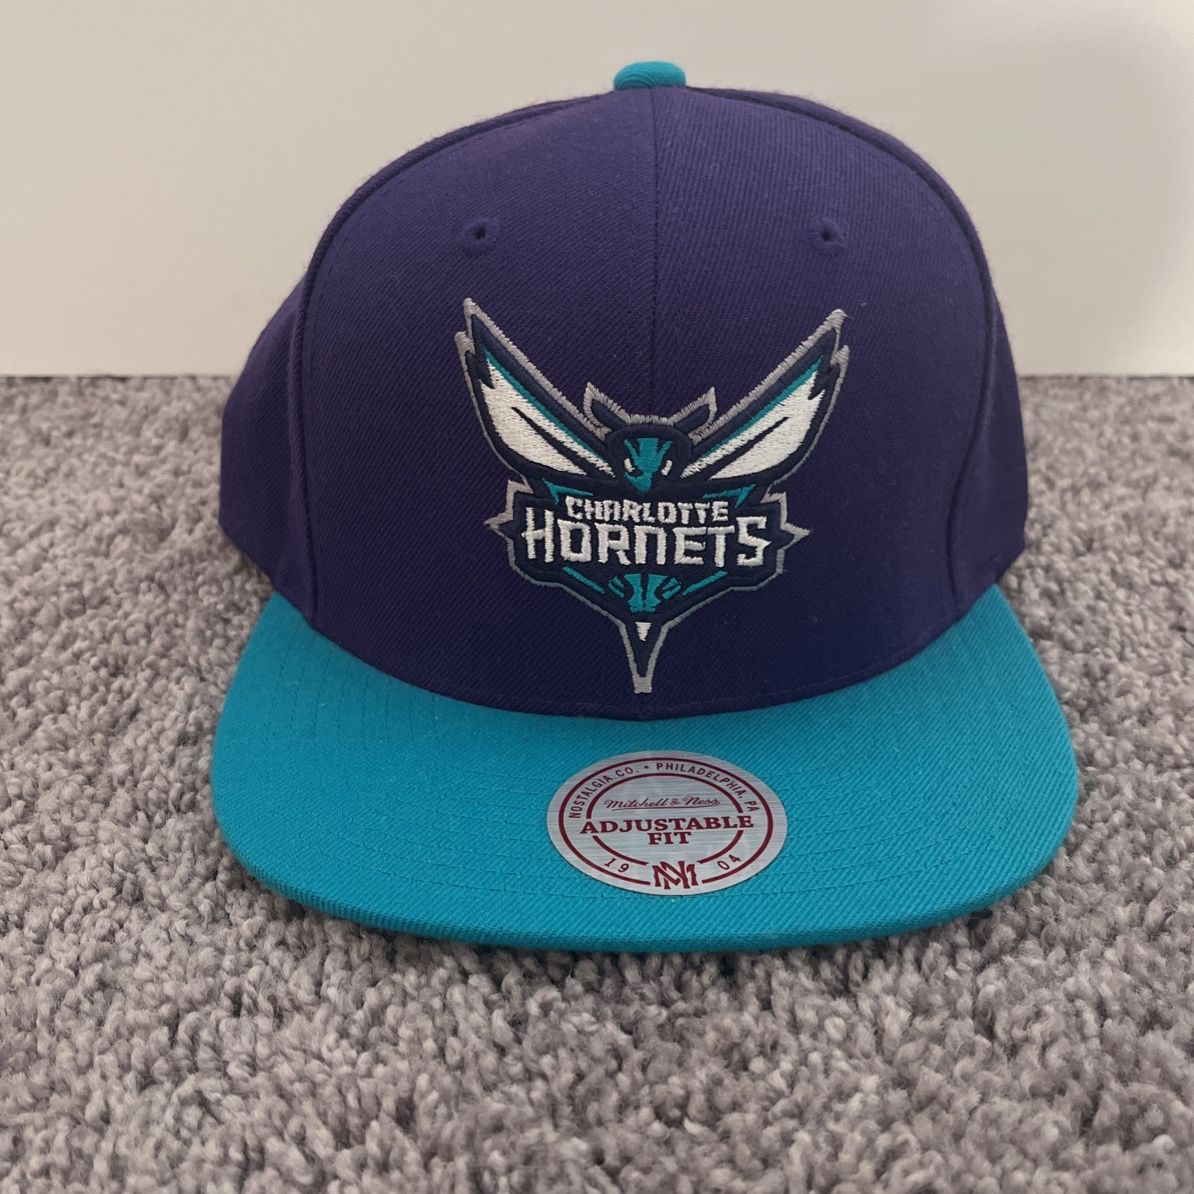 New Charlotte Hornets Mitchell & Ness Corduroy Hardwood Classics SnapBack  Hat for Sale in Anaheim, CA - OfferUp